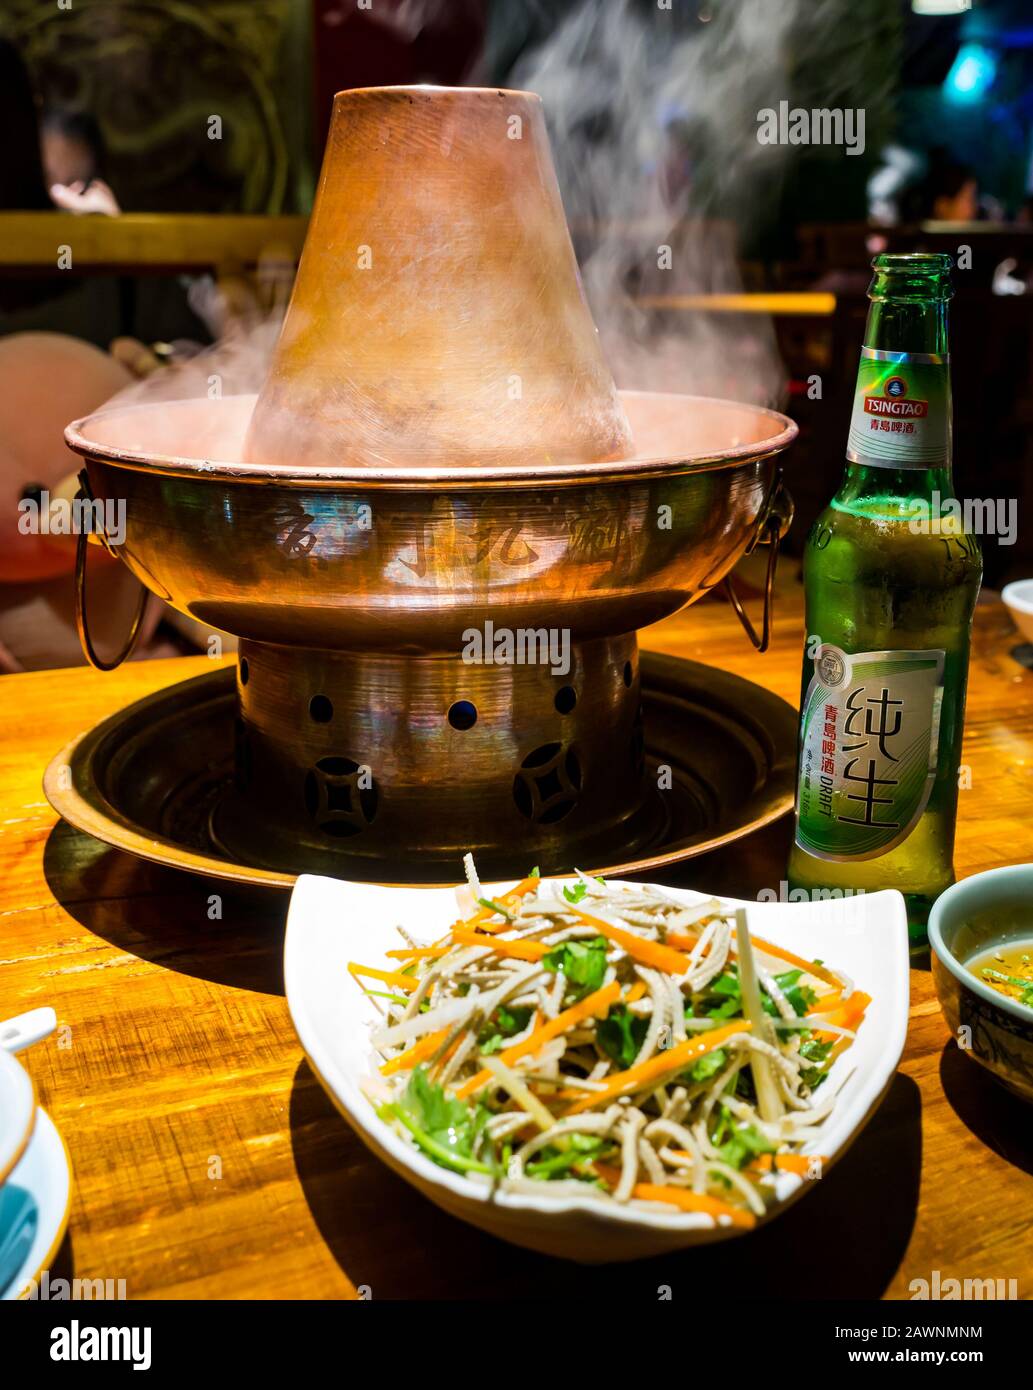 Mongolian hotpot served at table in restaurant with local Tsingtao beer, Xi Cheng Hutong District, Beijing, China, Asia Stock Photo